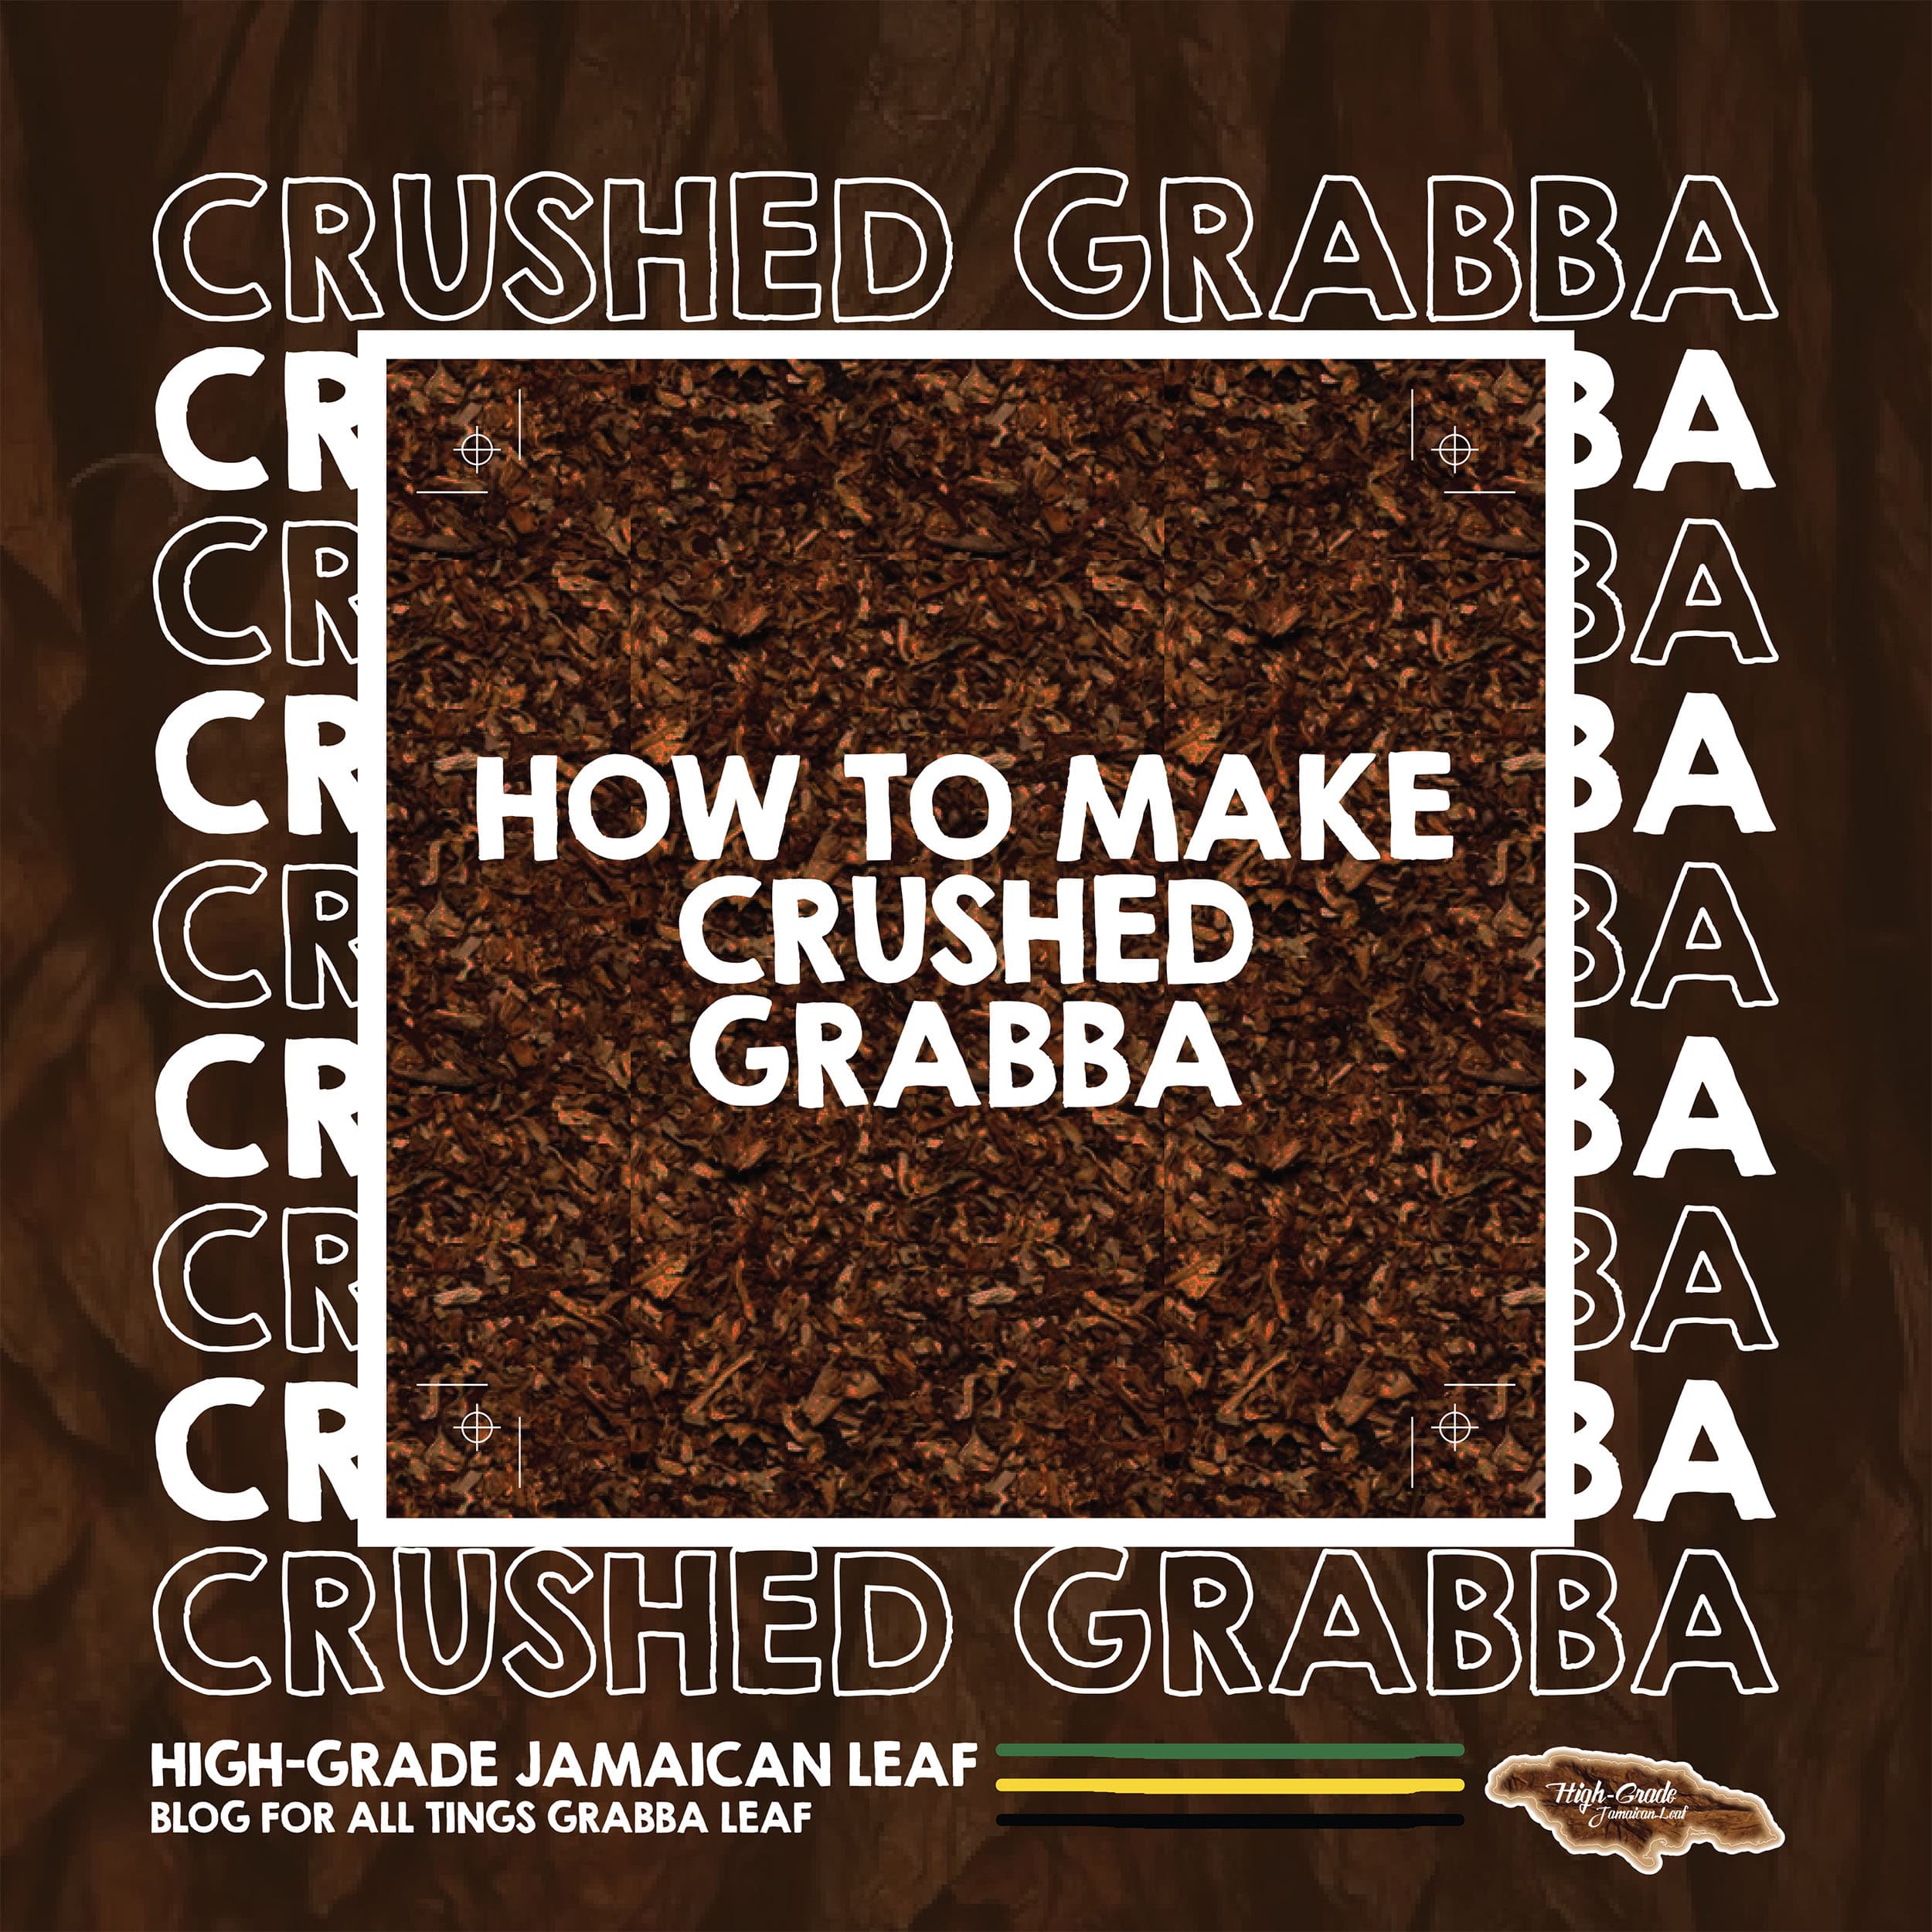 How to Make Crushed Grabba